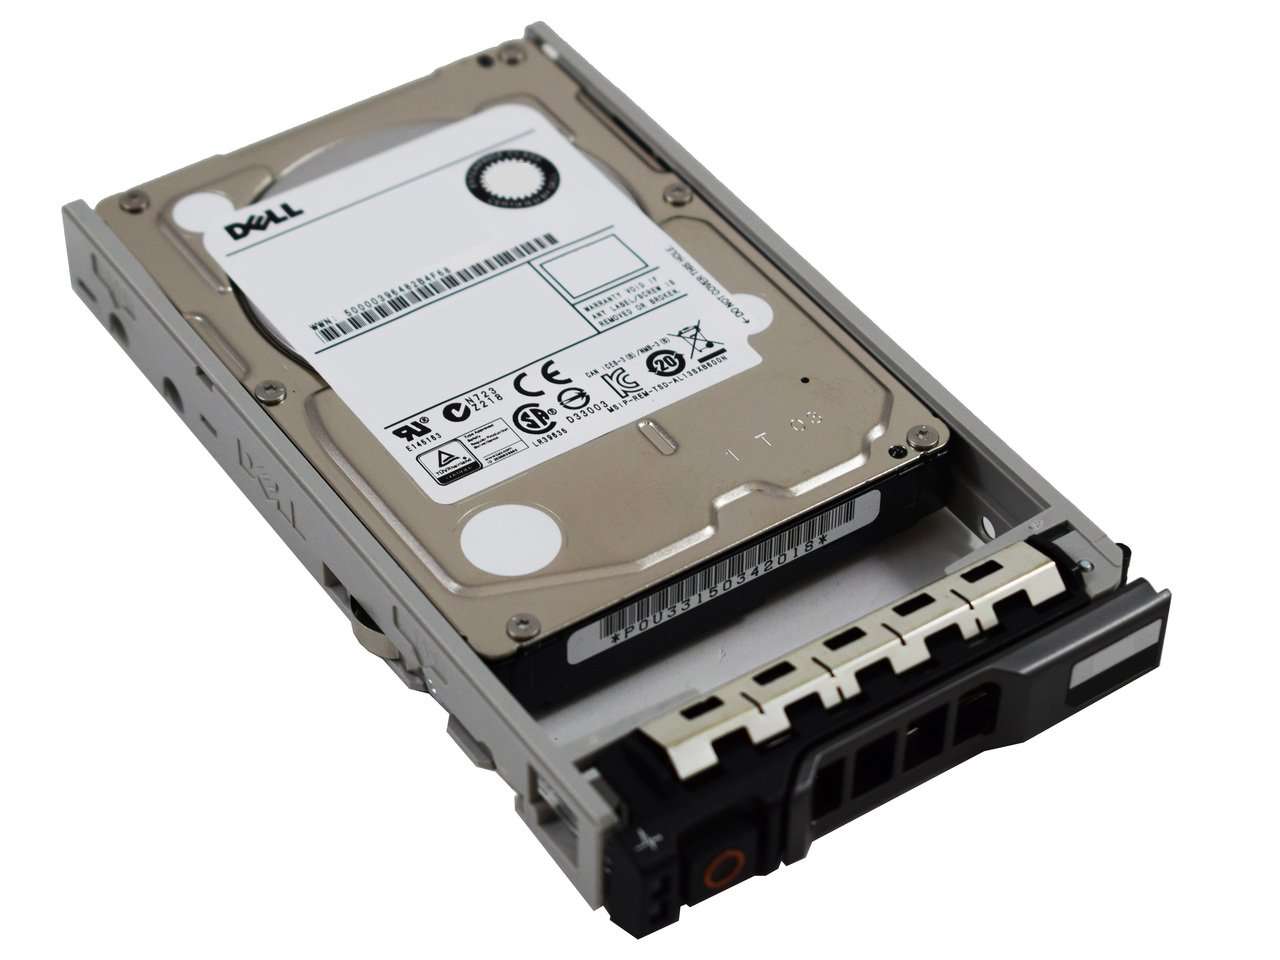 Dell G13 342-5169 600GB 10K RPM SAS 6Gb/s 512n 2.5" Manufacturer Recertified HDD